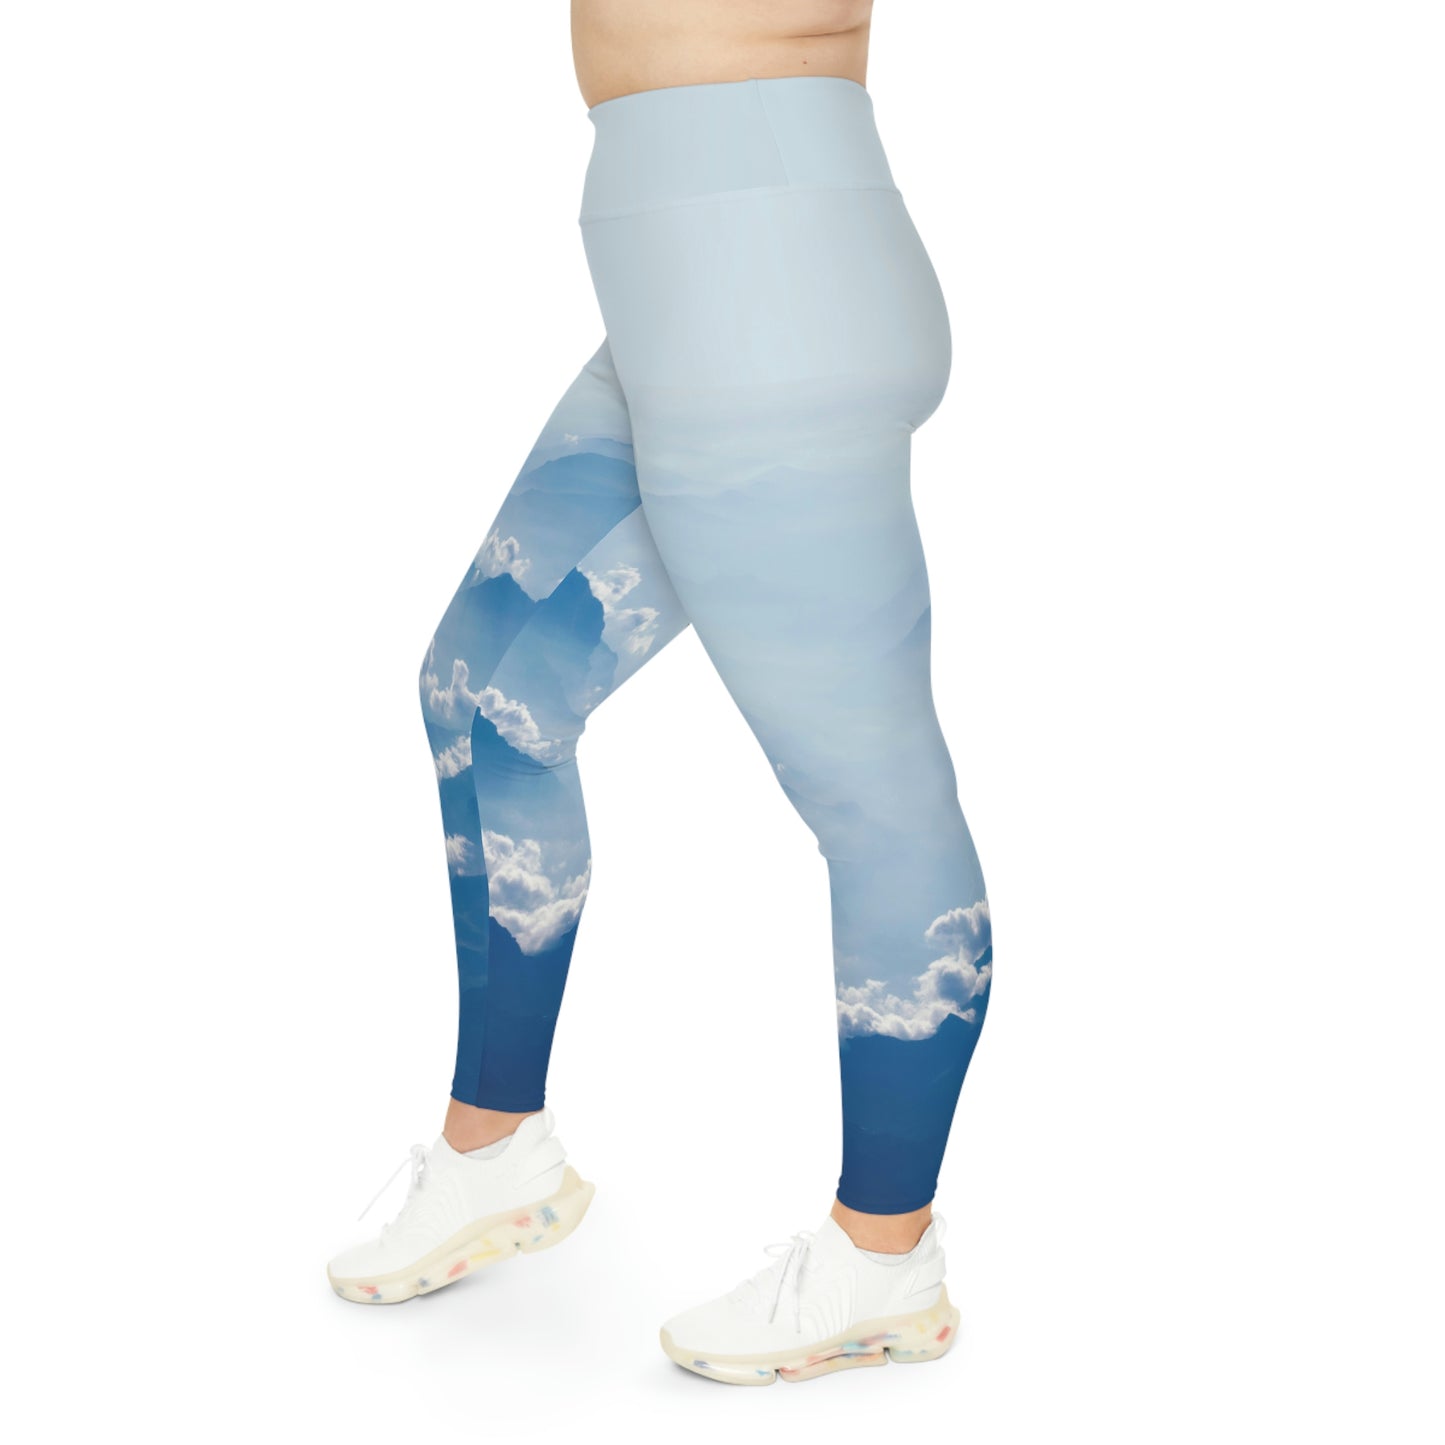 Clouds Plus Size Leggings Plus Size Leggings One of a Kind Gift - Unique Workout Activewear tights for Mom fitness, Mothers Day, Girlfriend Christmas Gift